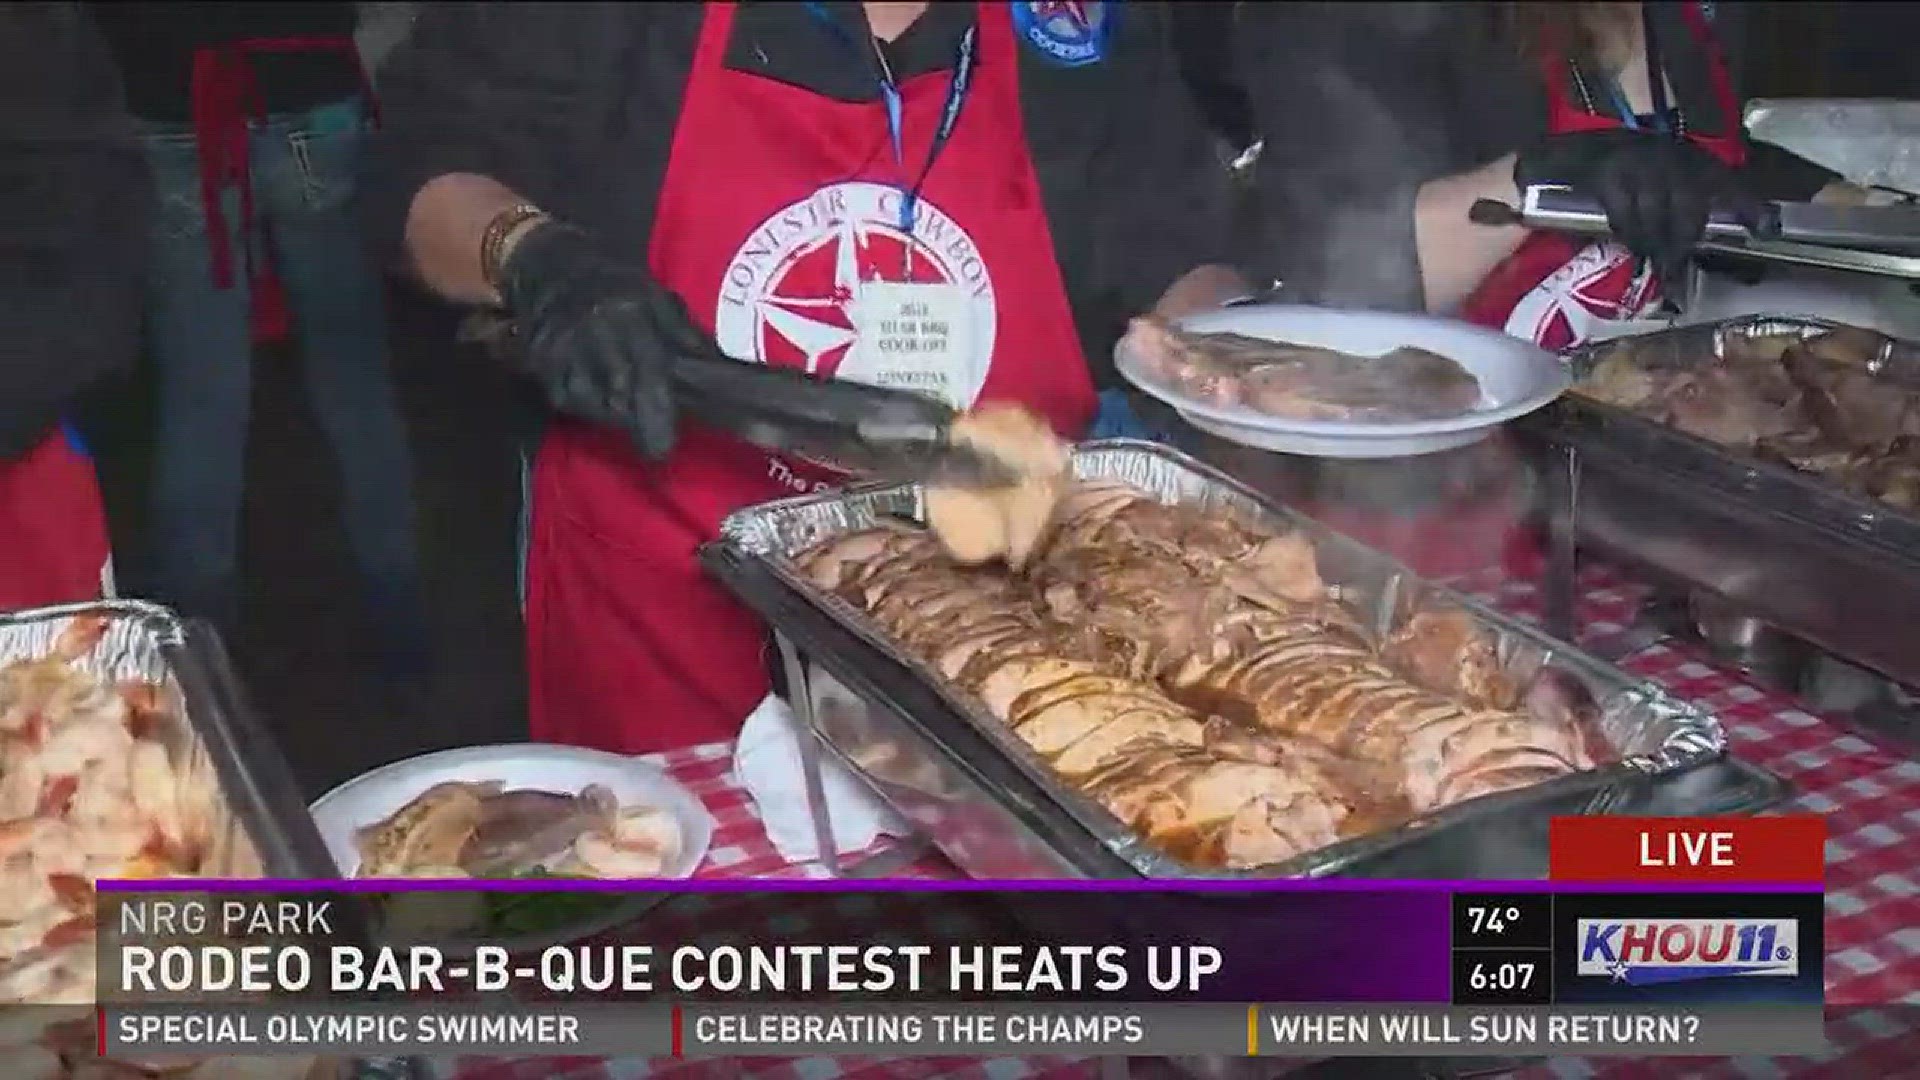 Tens of thousands of hungry Houston-area residents will pack into NRG Park this weekend for the World's Championship Bar-B-Que Contest.  It's the finger-lickin' good kickoff to the Houston Livestock Show and Rodeo.